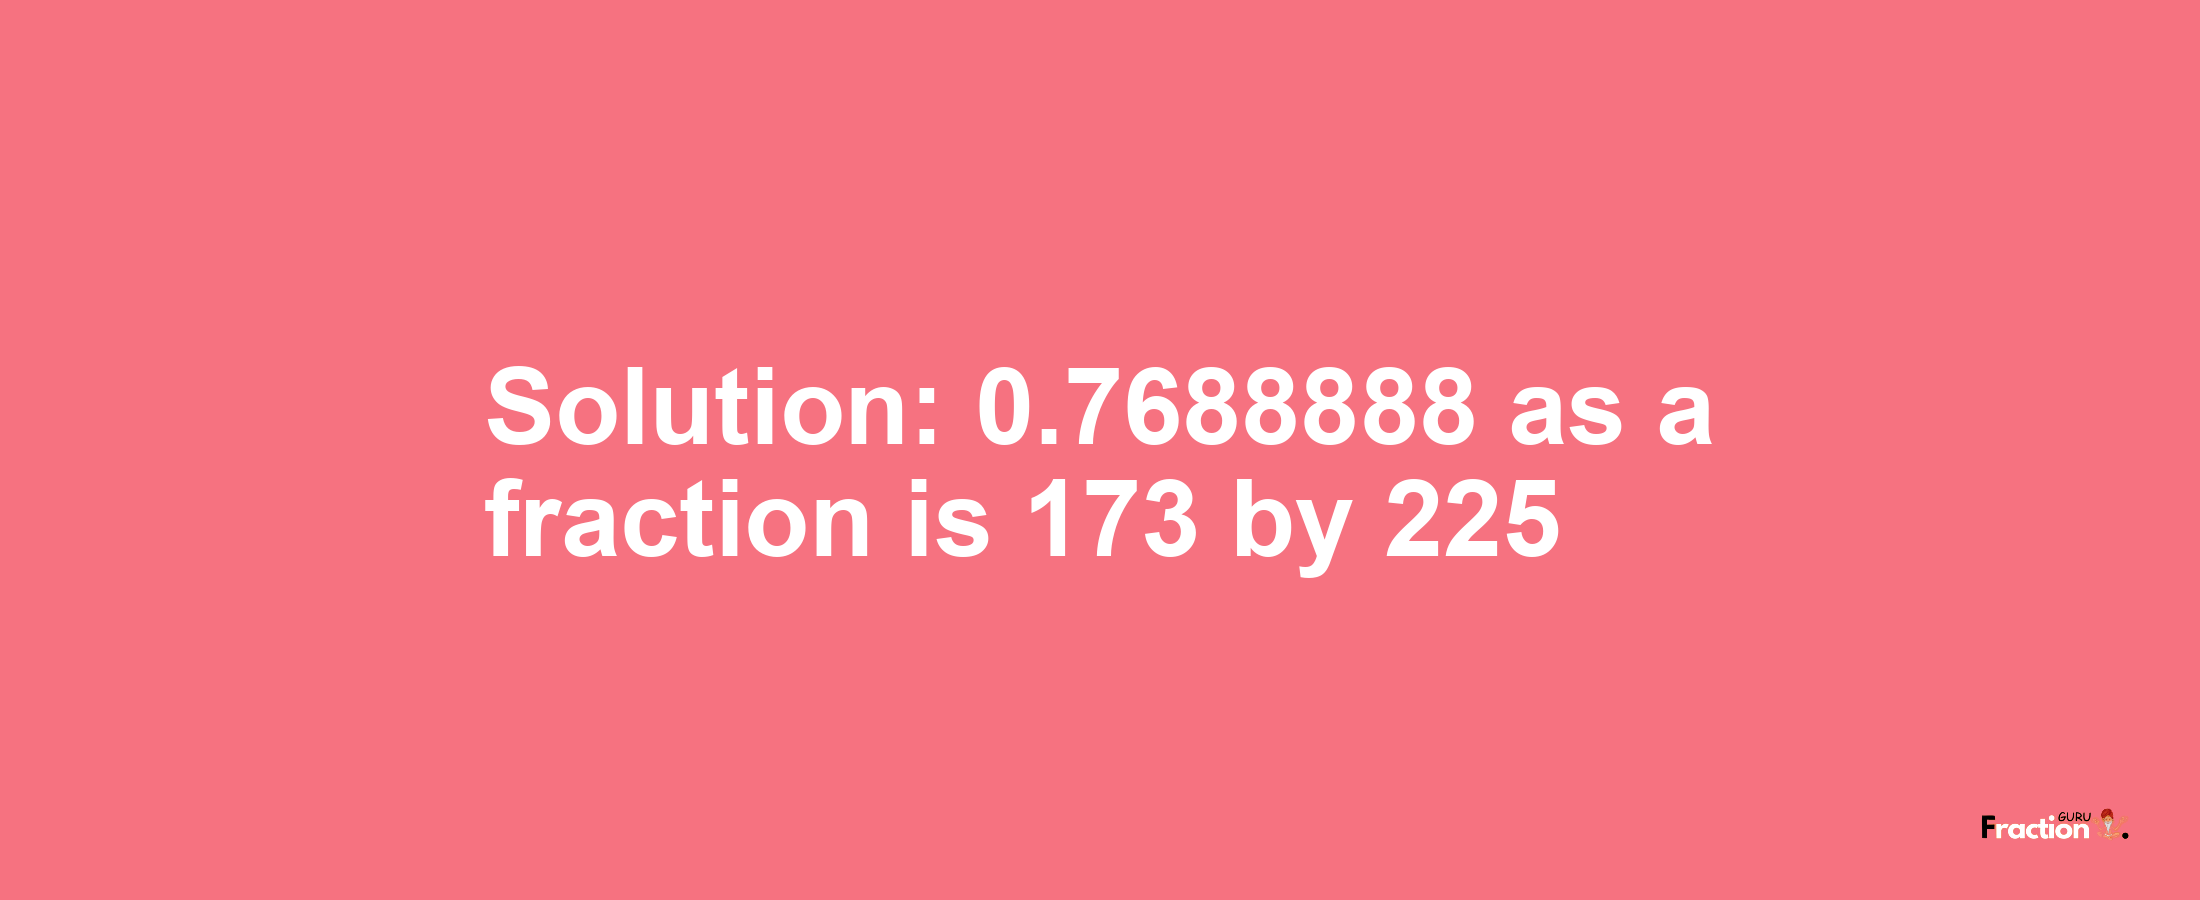 Solution:0.7688888 as a fraction is 173/225